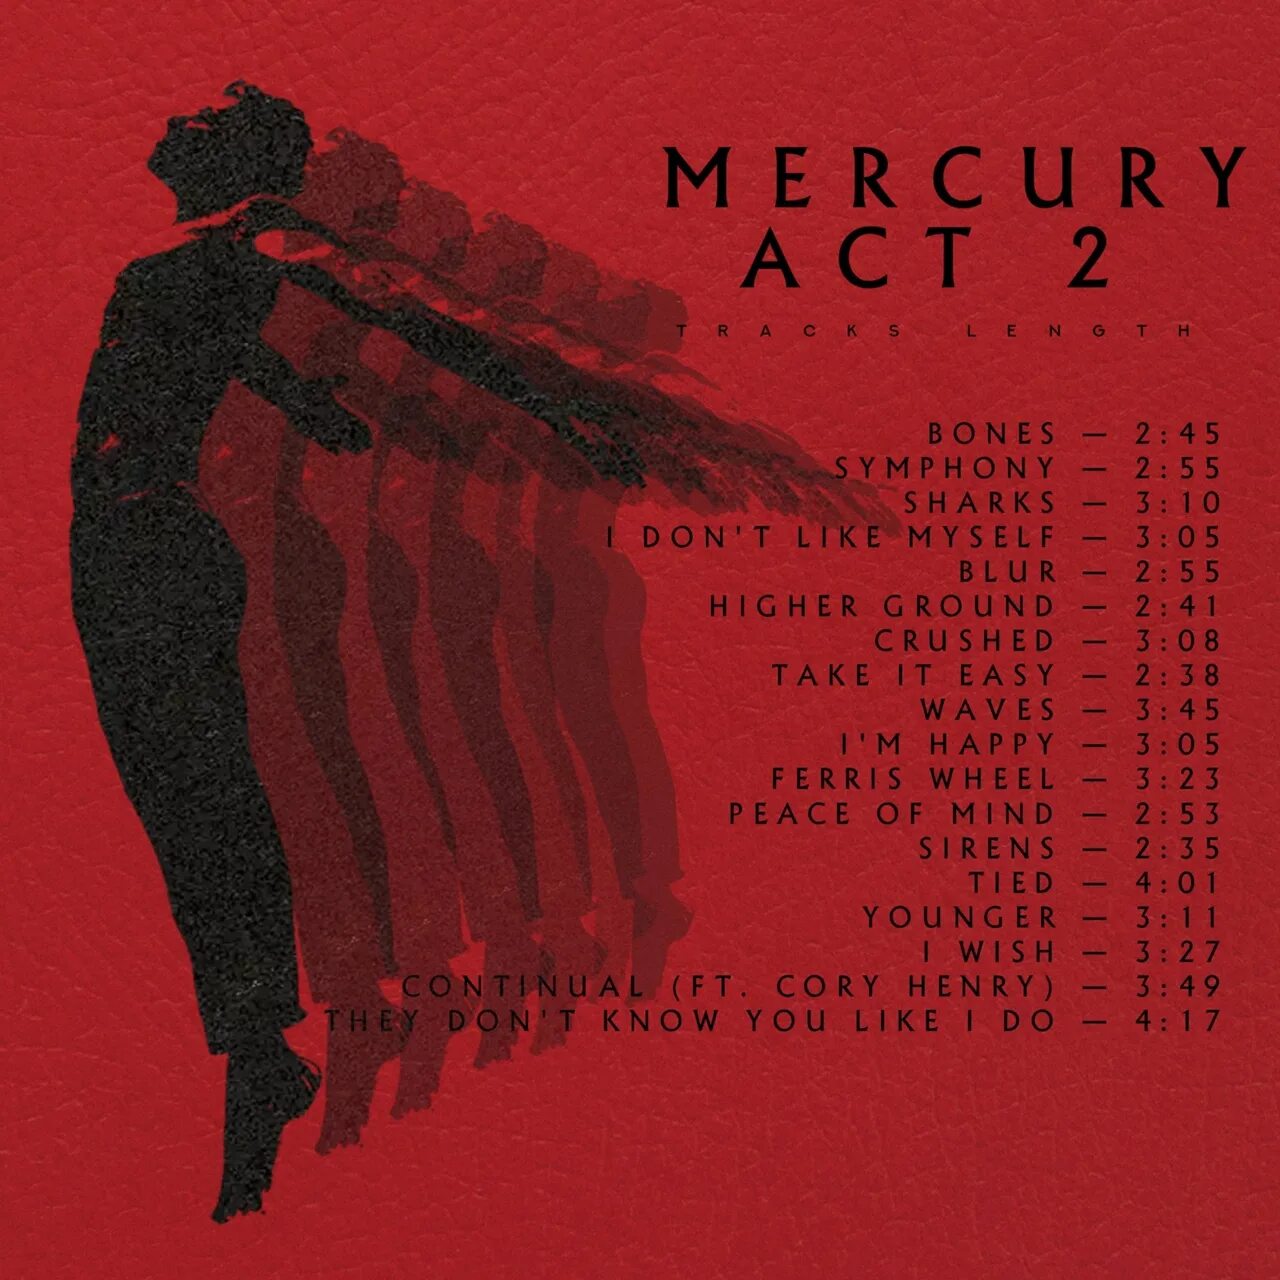 Act two. Imagine Dragons Mercury Act 2 2022. Imagine Dragons альбом Mercury Act 2. Imagine Dragons Mercury Act 2 обложка. Imagine Dragons Mercury - Acts 1 & 2.